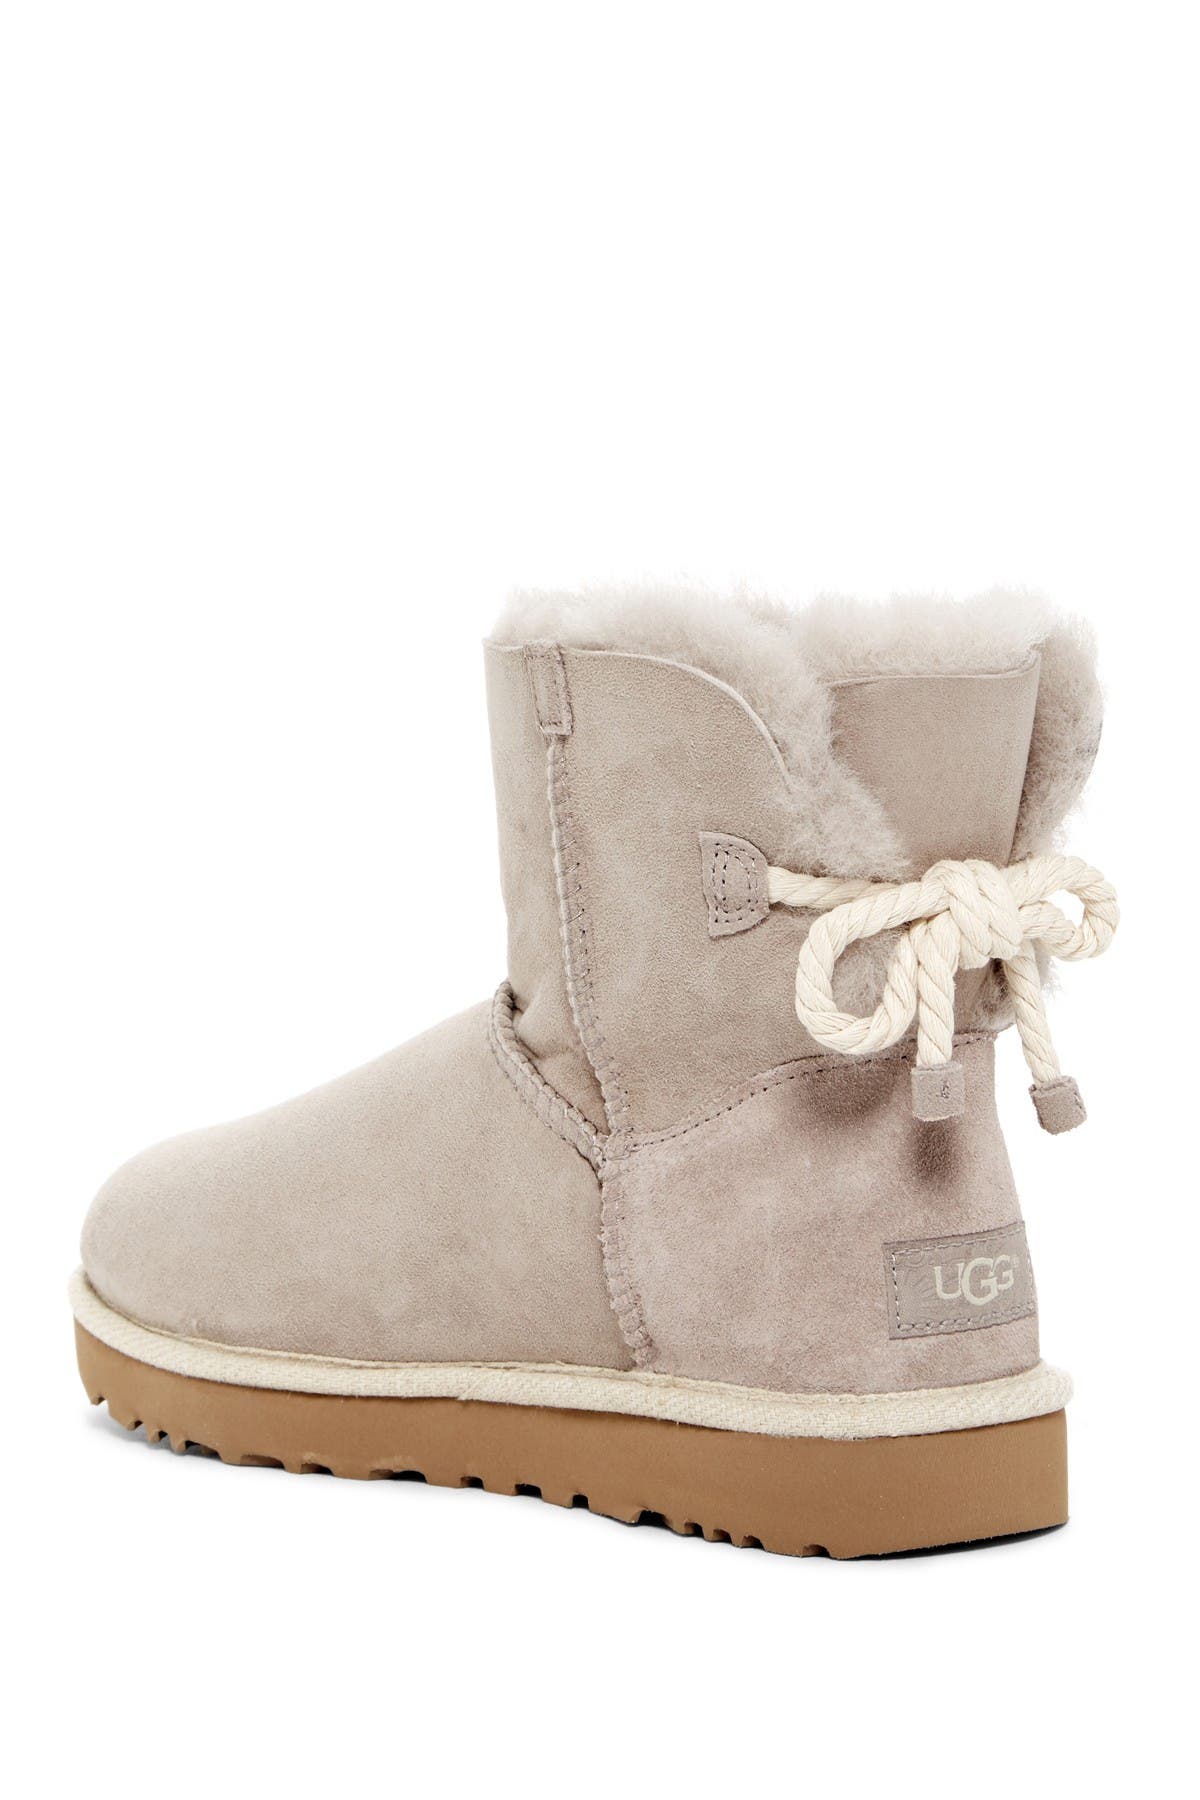 uggs with rope tie